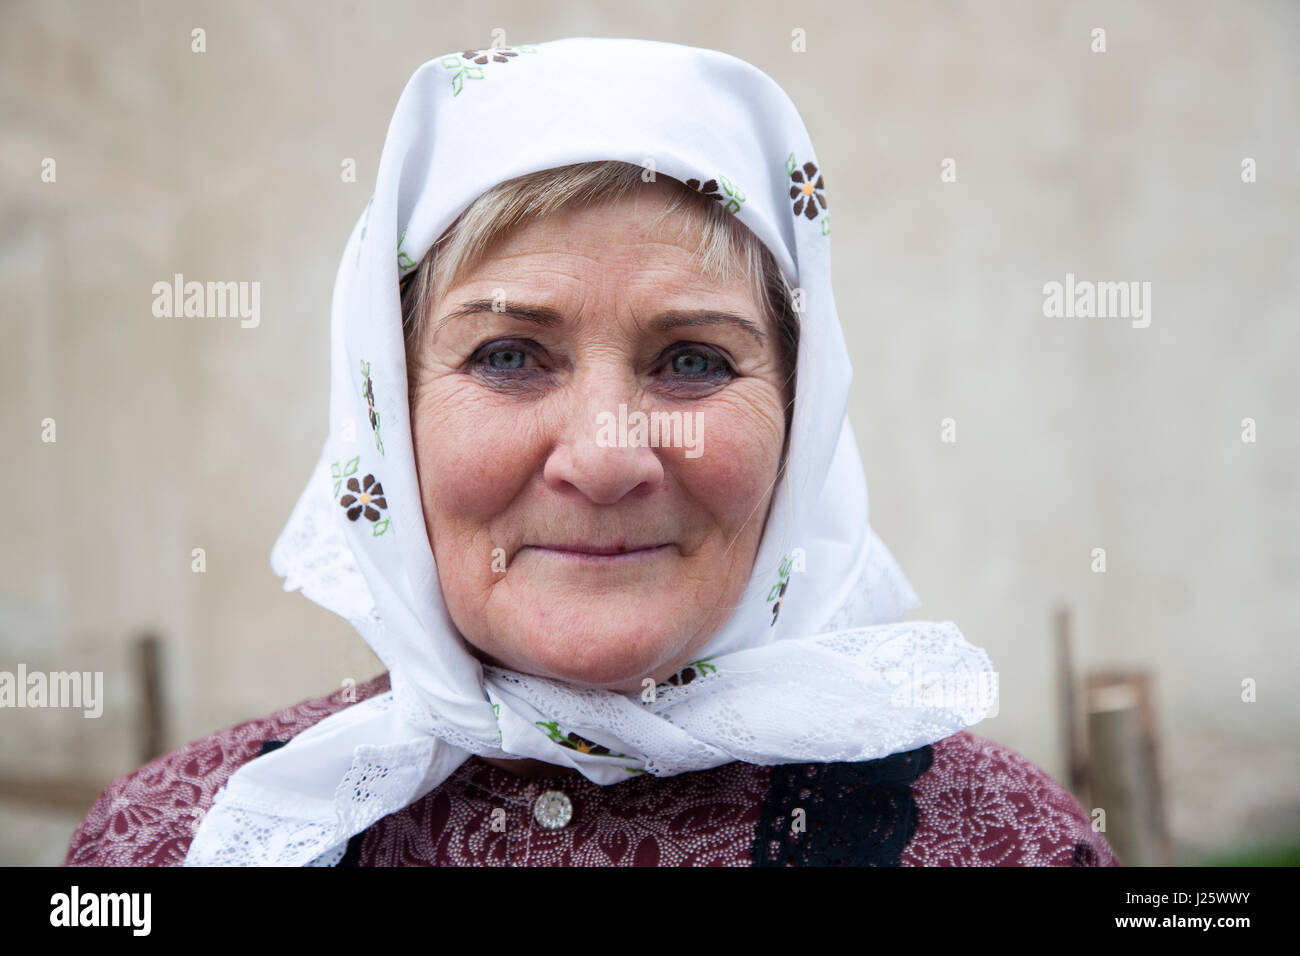 Portrait of a traditional woman from the Moravian region of Czech Republic wearing a typical head scarf Stock Photo